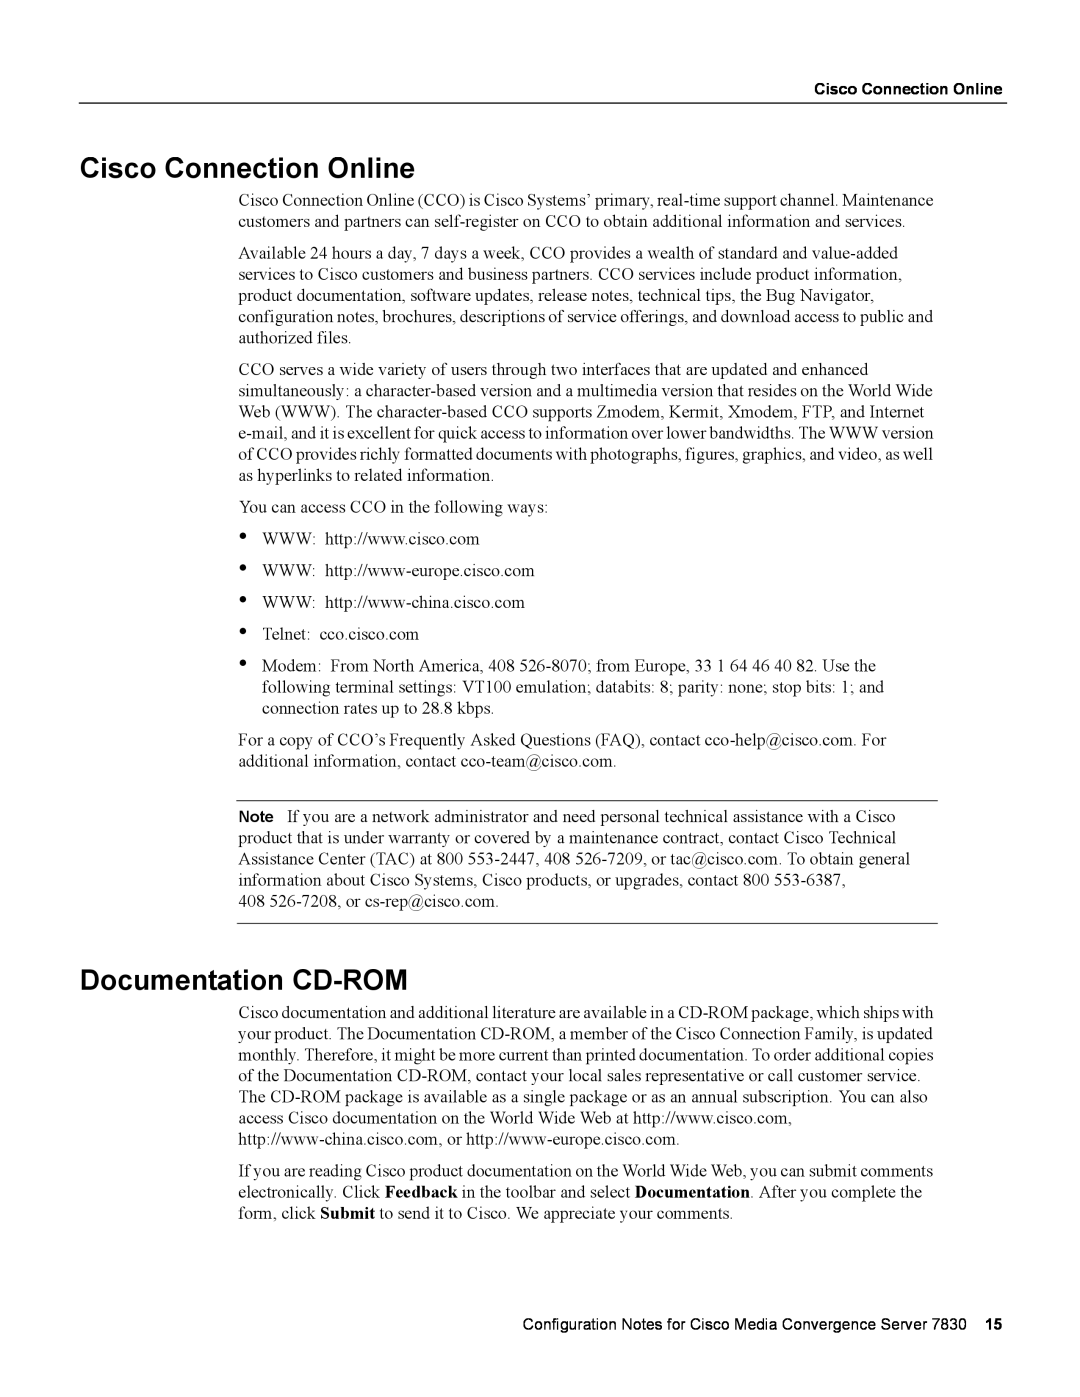 Cisco Systems 7830 specifications Cisco Connection Online, Documentation CD-ROM 